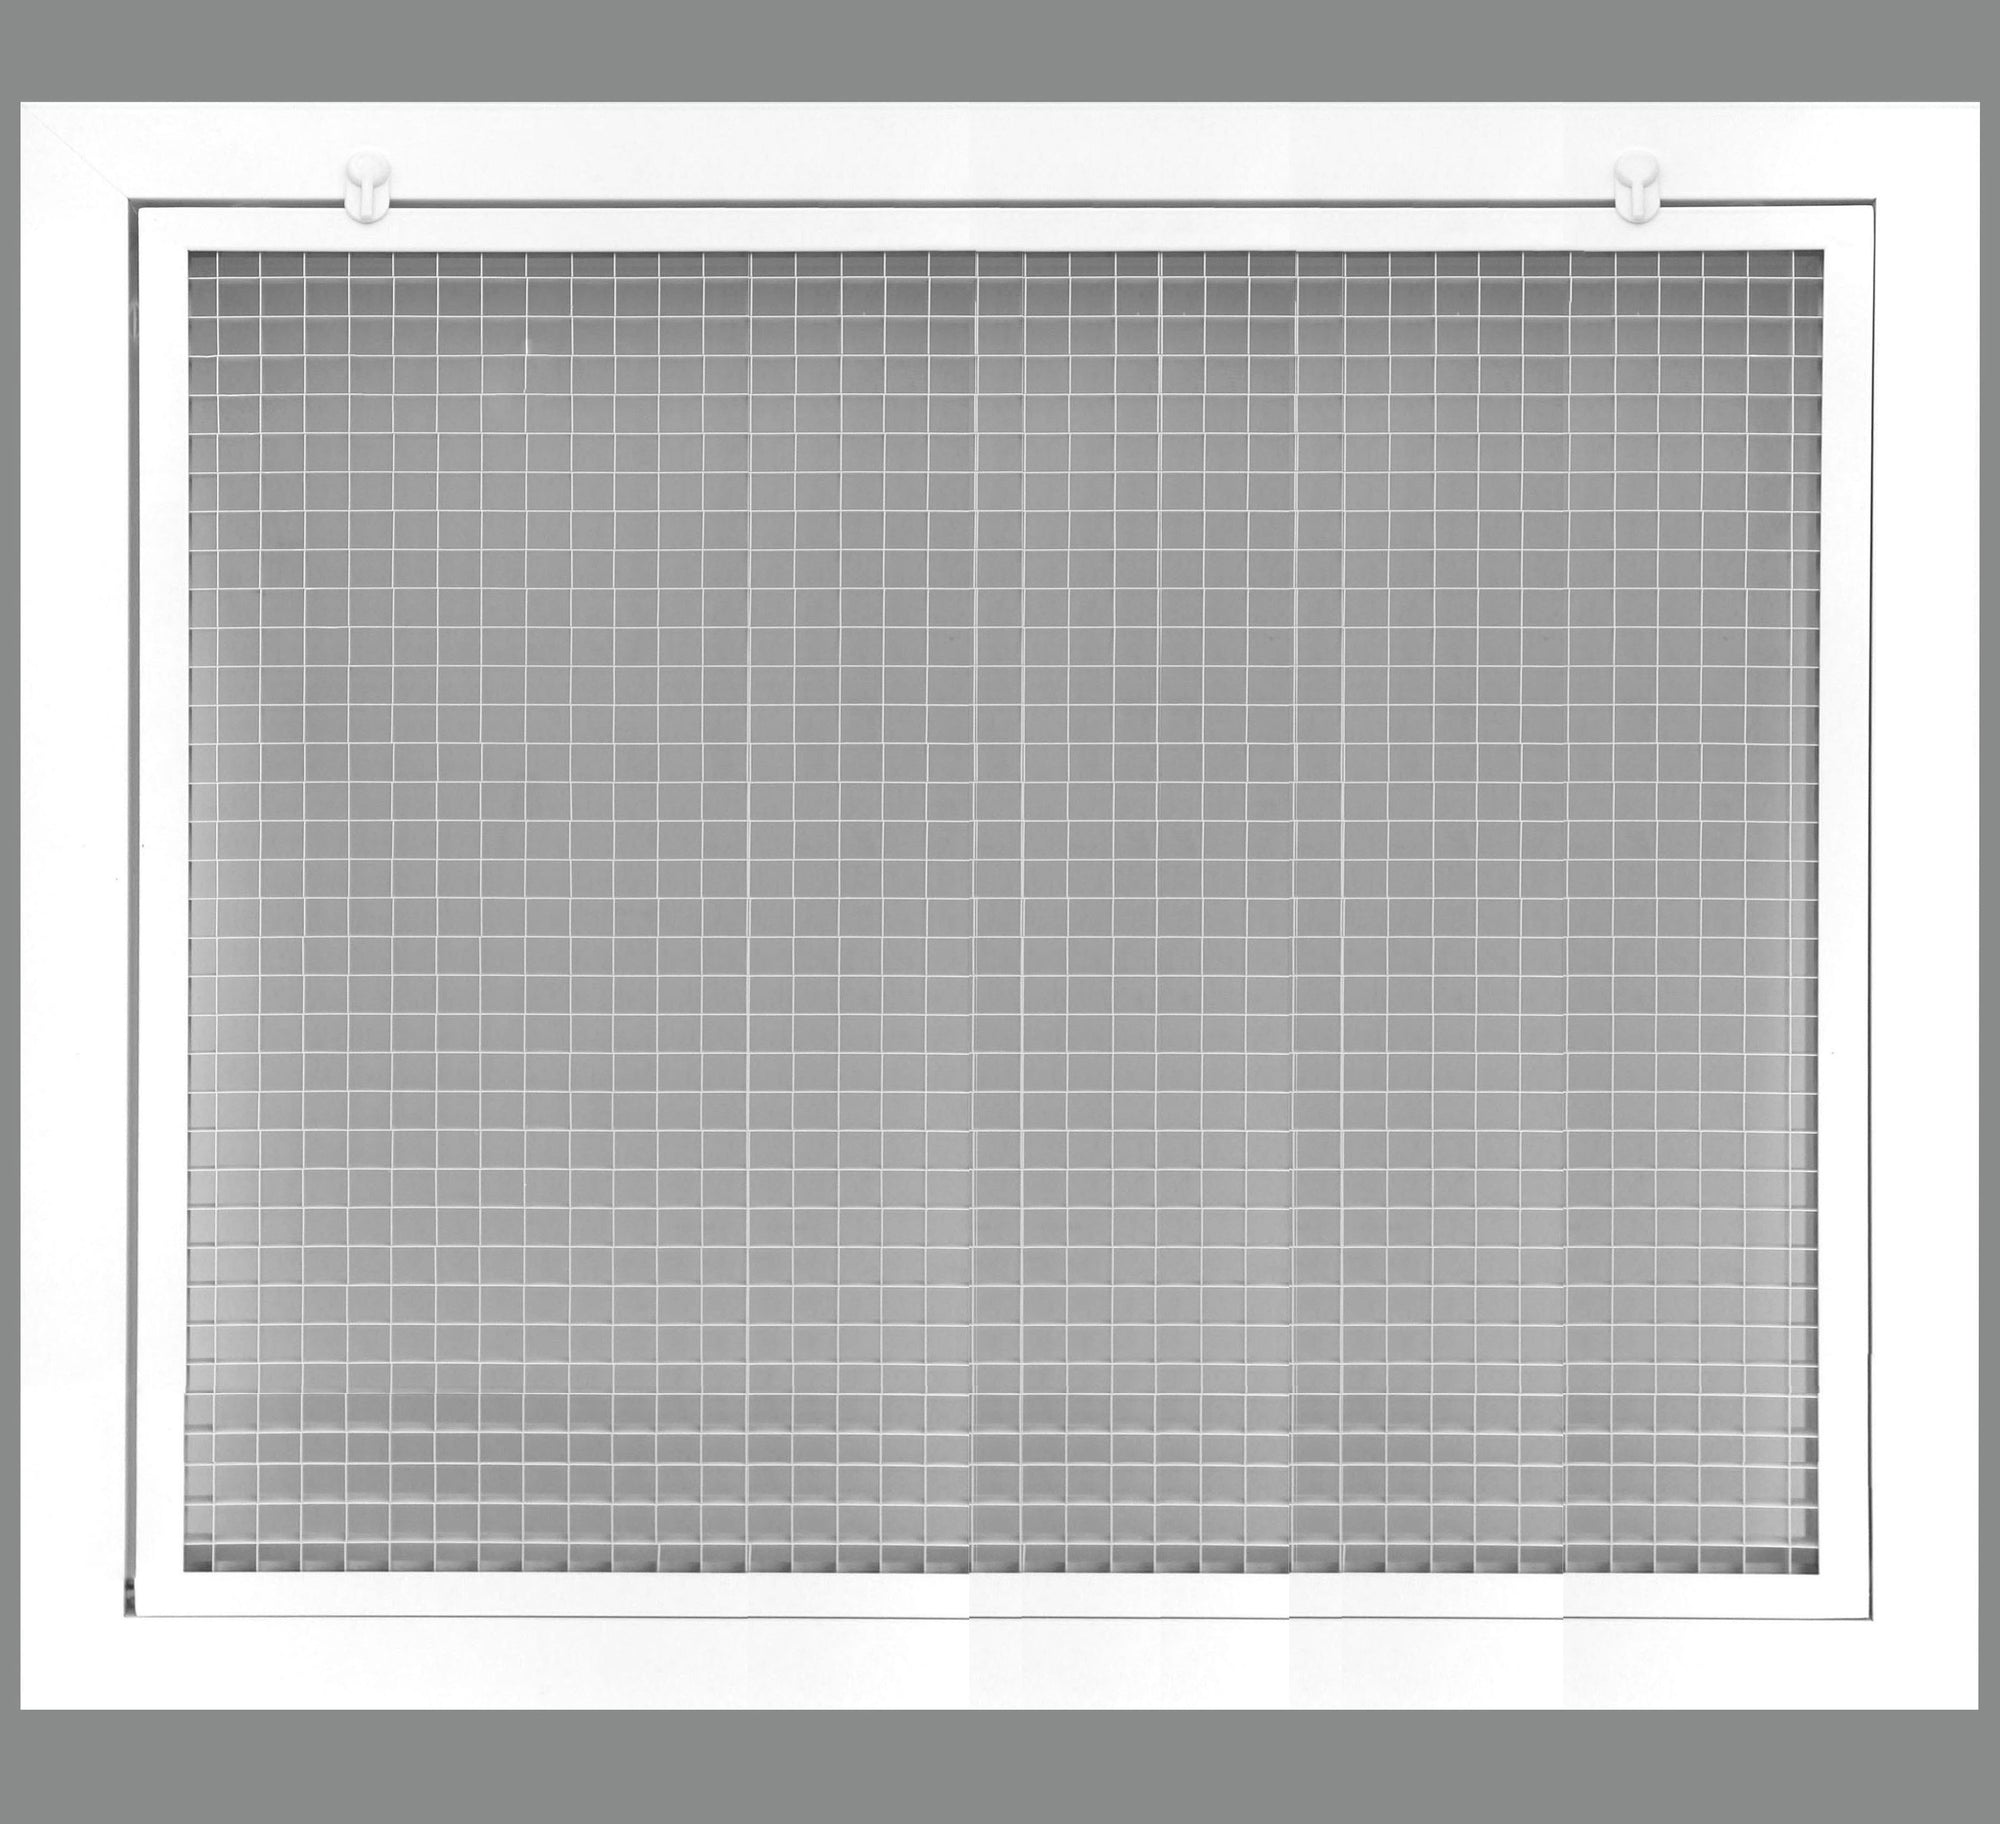 36" x 34" Cube Core Eggcrate Return Air Filter Grille for 1" Filter